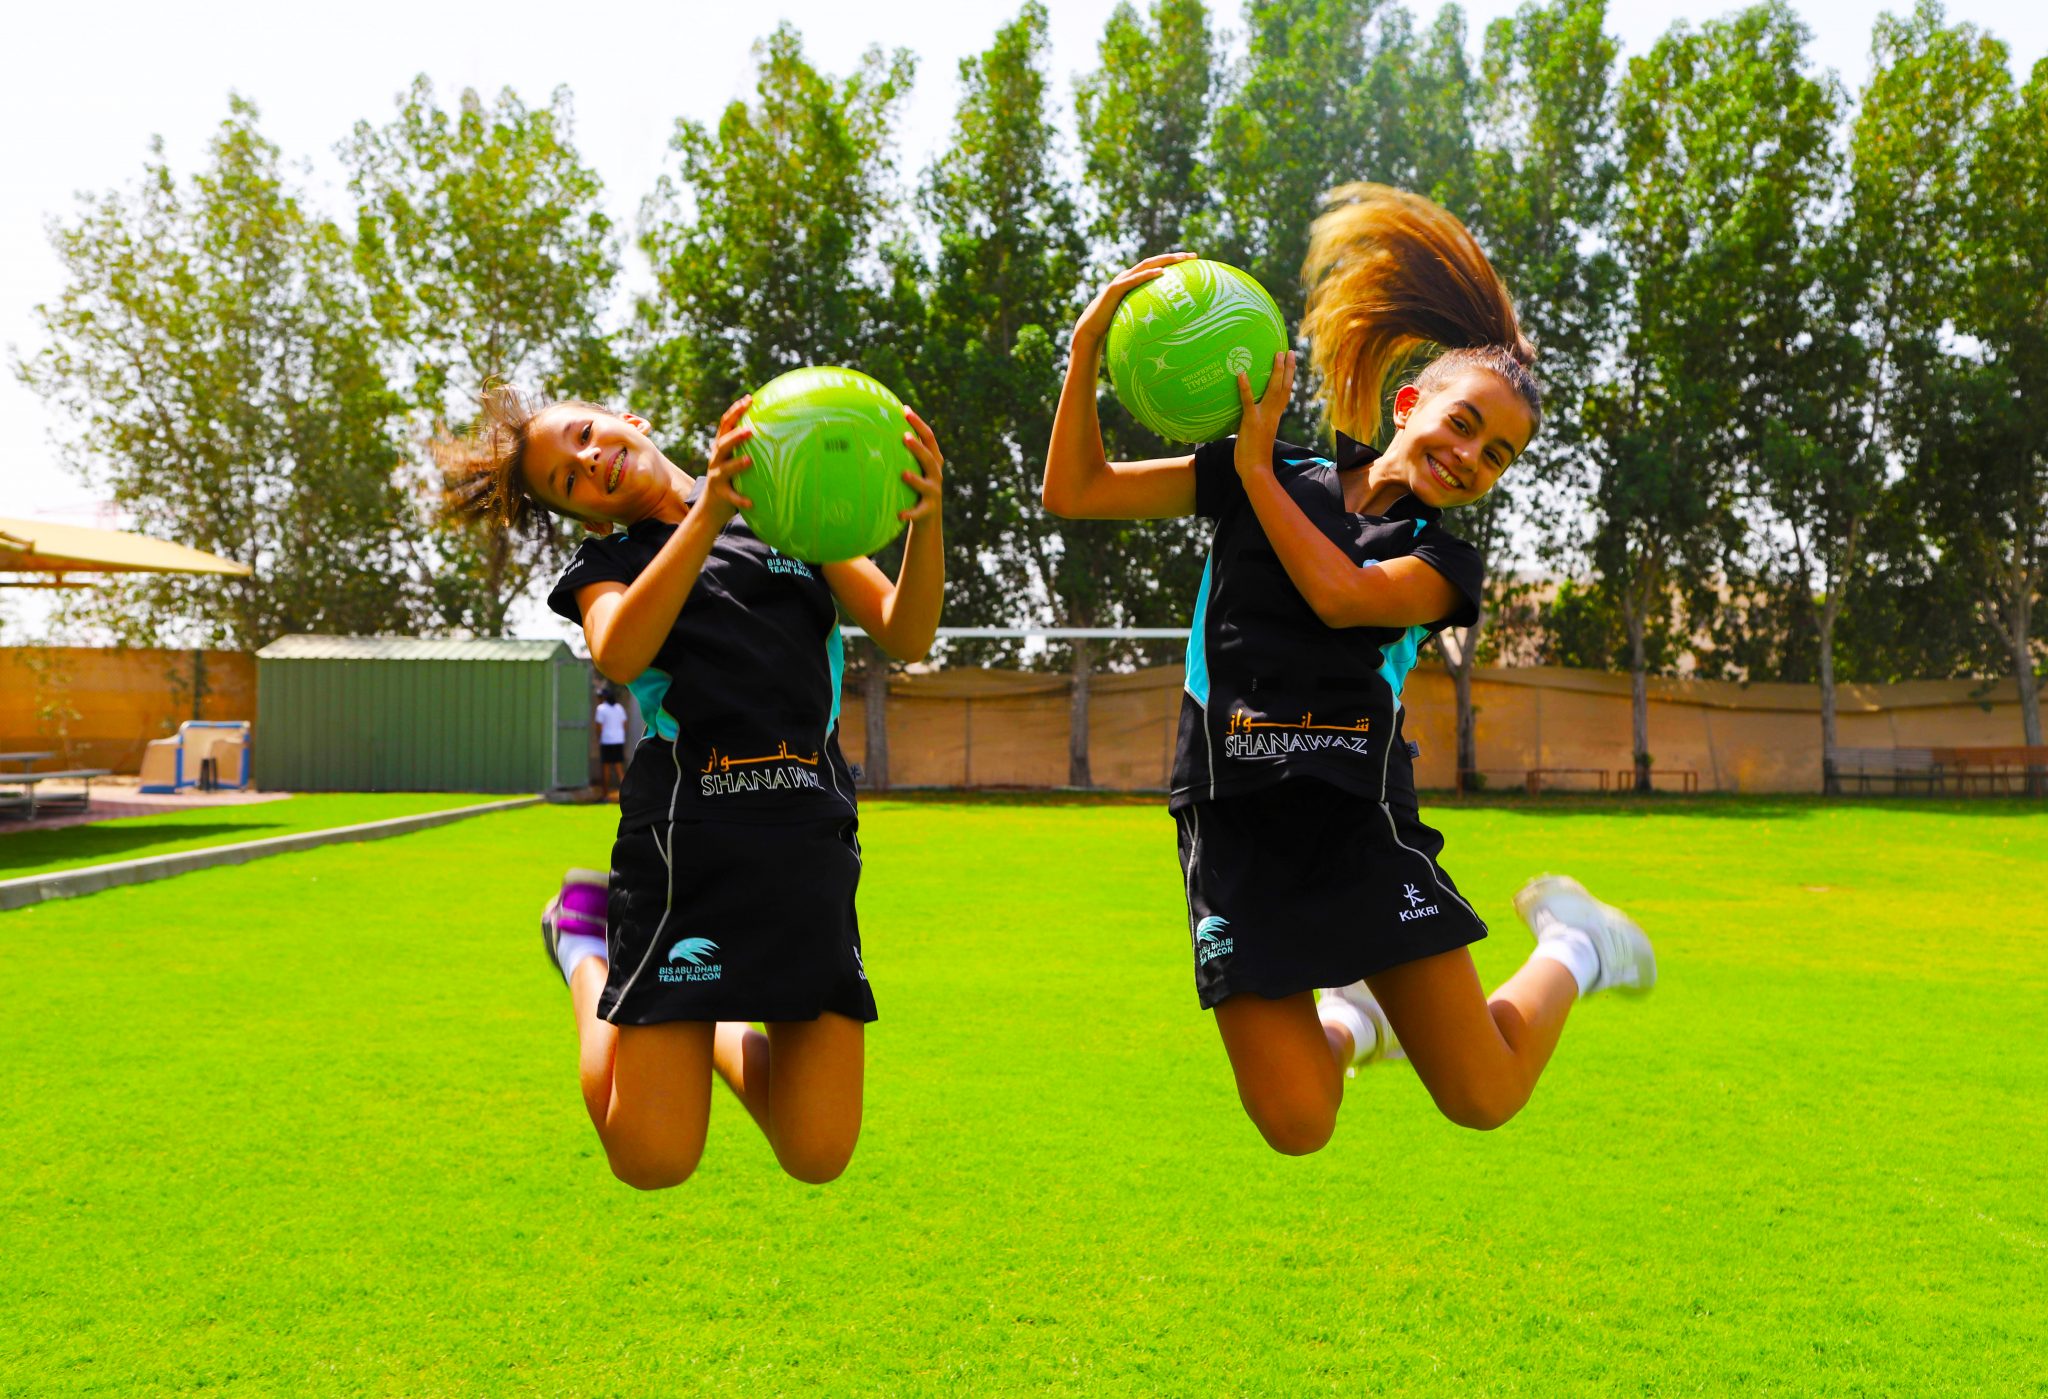 A photograph of children jumping during sports lessons at the British International School Abu Dhabi